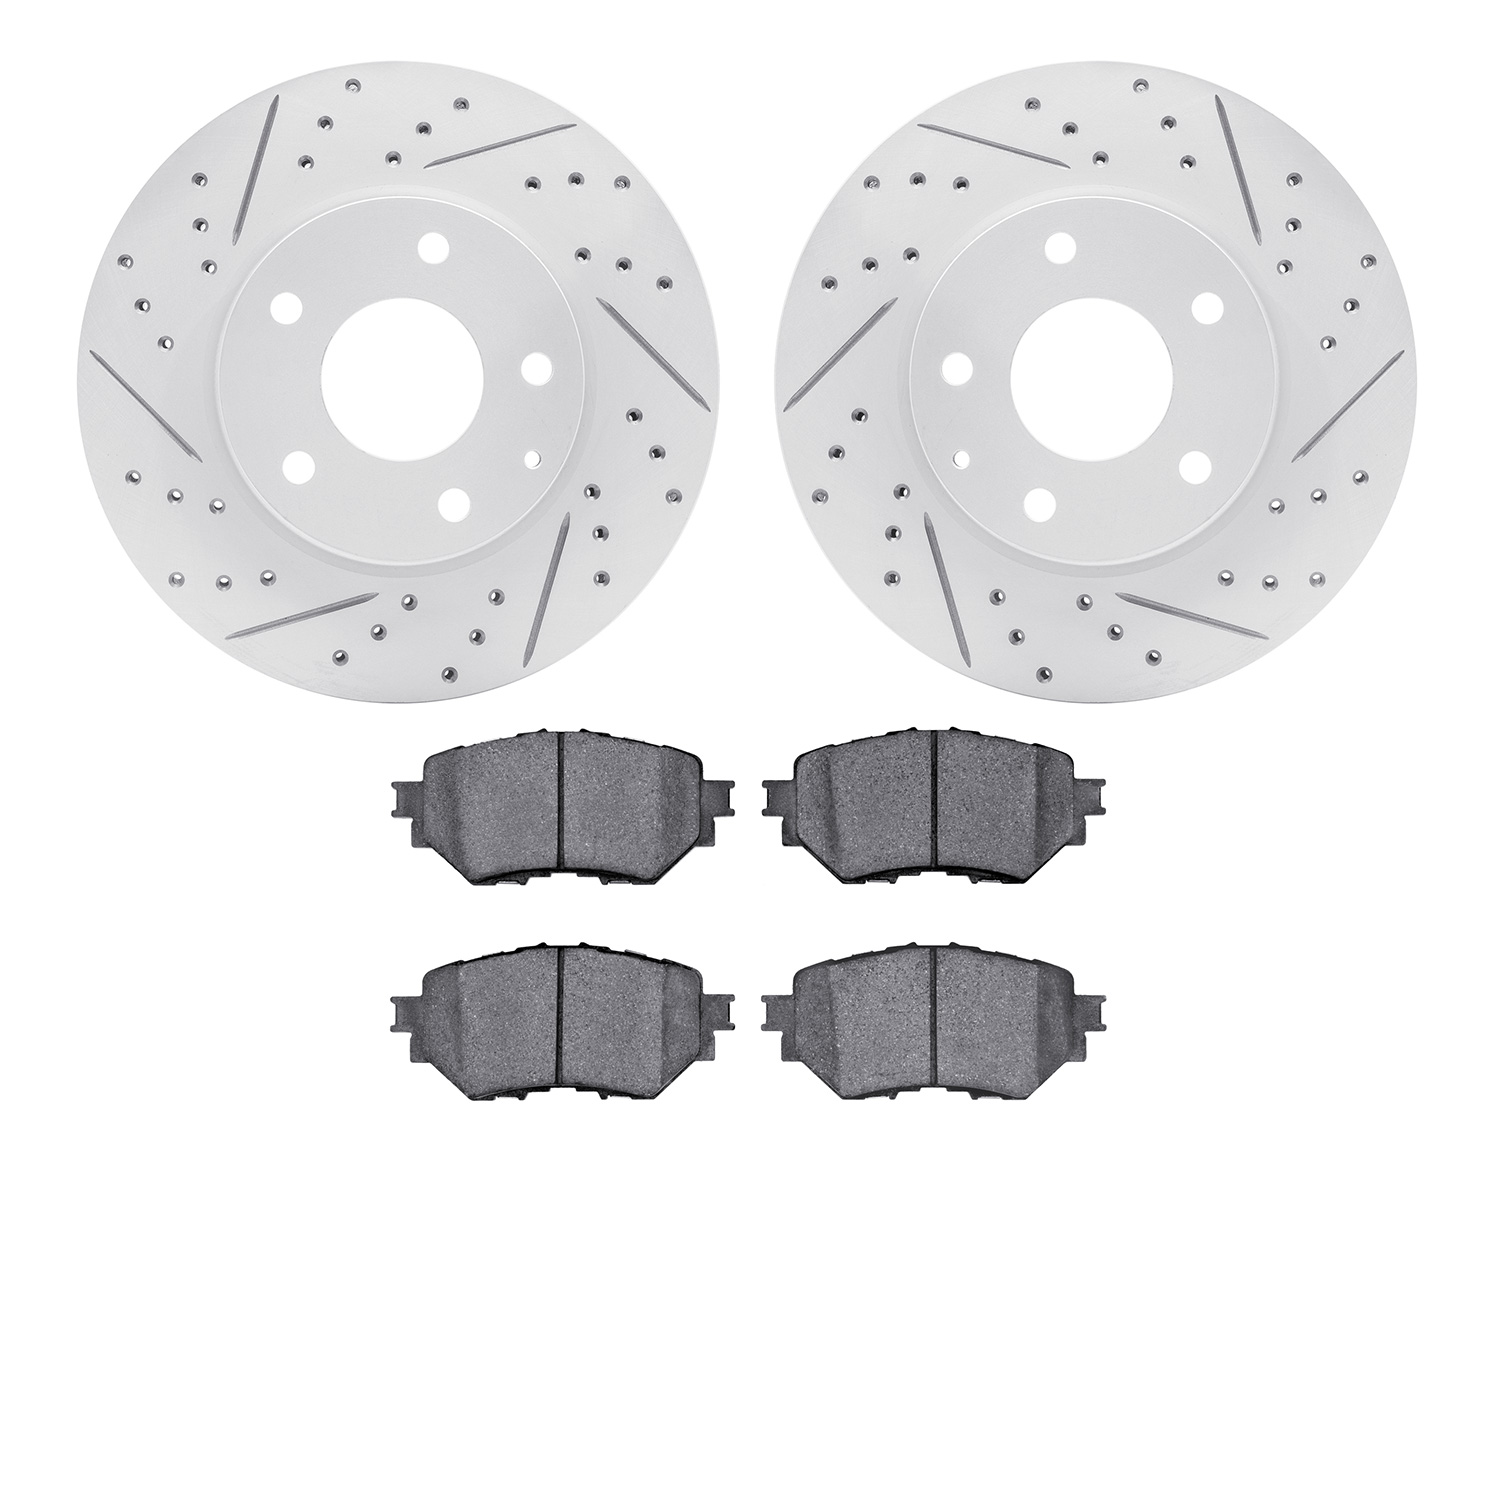 2502-80032 Geoperformance Drilled/Slotted Rotors w/5000 Advanced Brake Pads Kit, 2014-2018 Ford/Lincoln/Mercury/Mazda, Position: